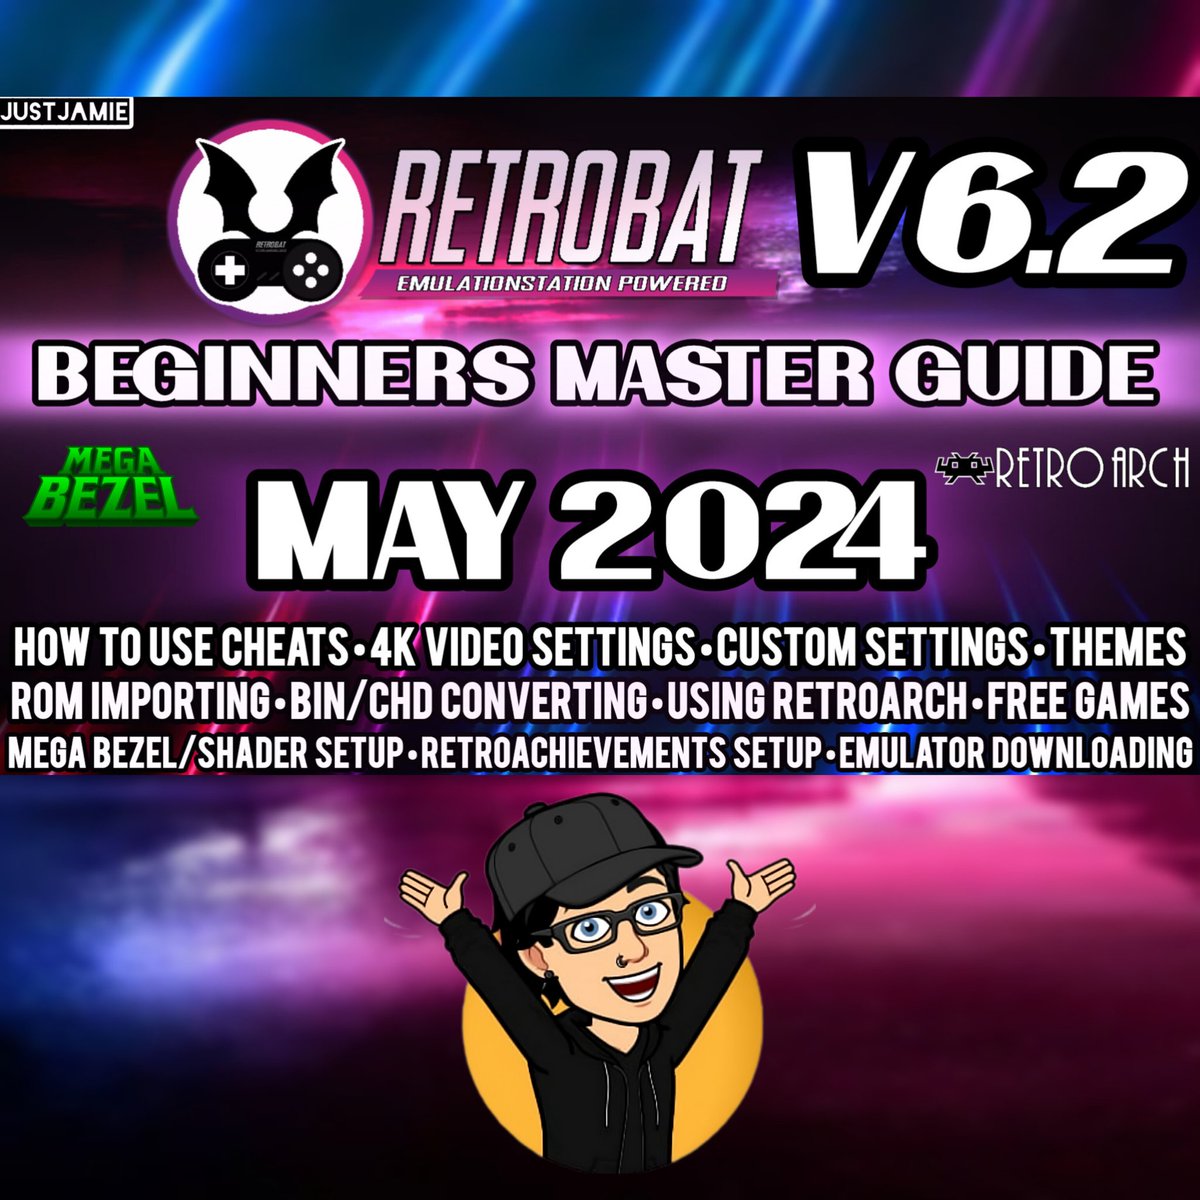 Retrobat V6.2 STABLE has just dropped. Here is a complete setup guide to get you started with likely the EASIEST frontend system out there. youtu.be/SyYfYPRRGQA #retrobat #emulationstation #retroarch #RETROGAMING #frontend #justjamie